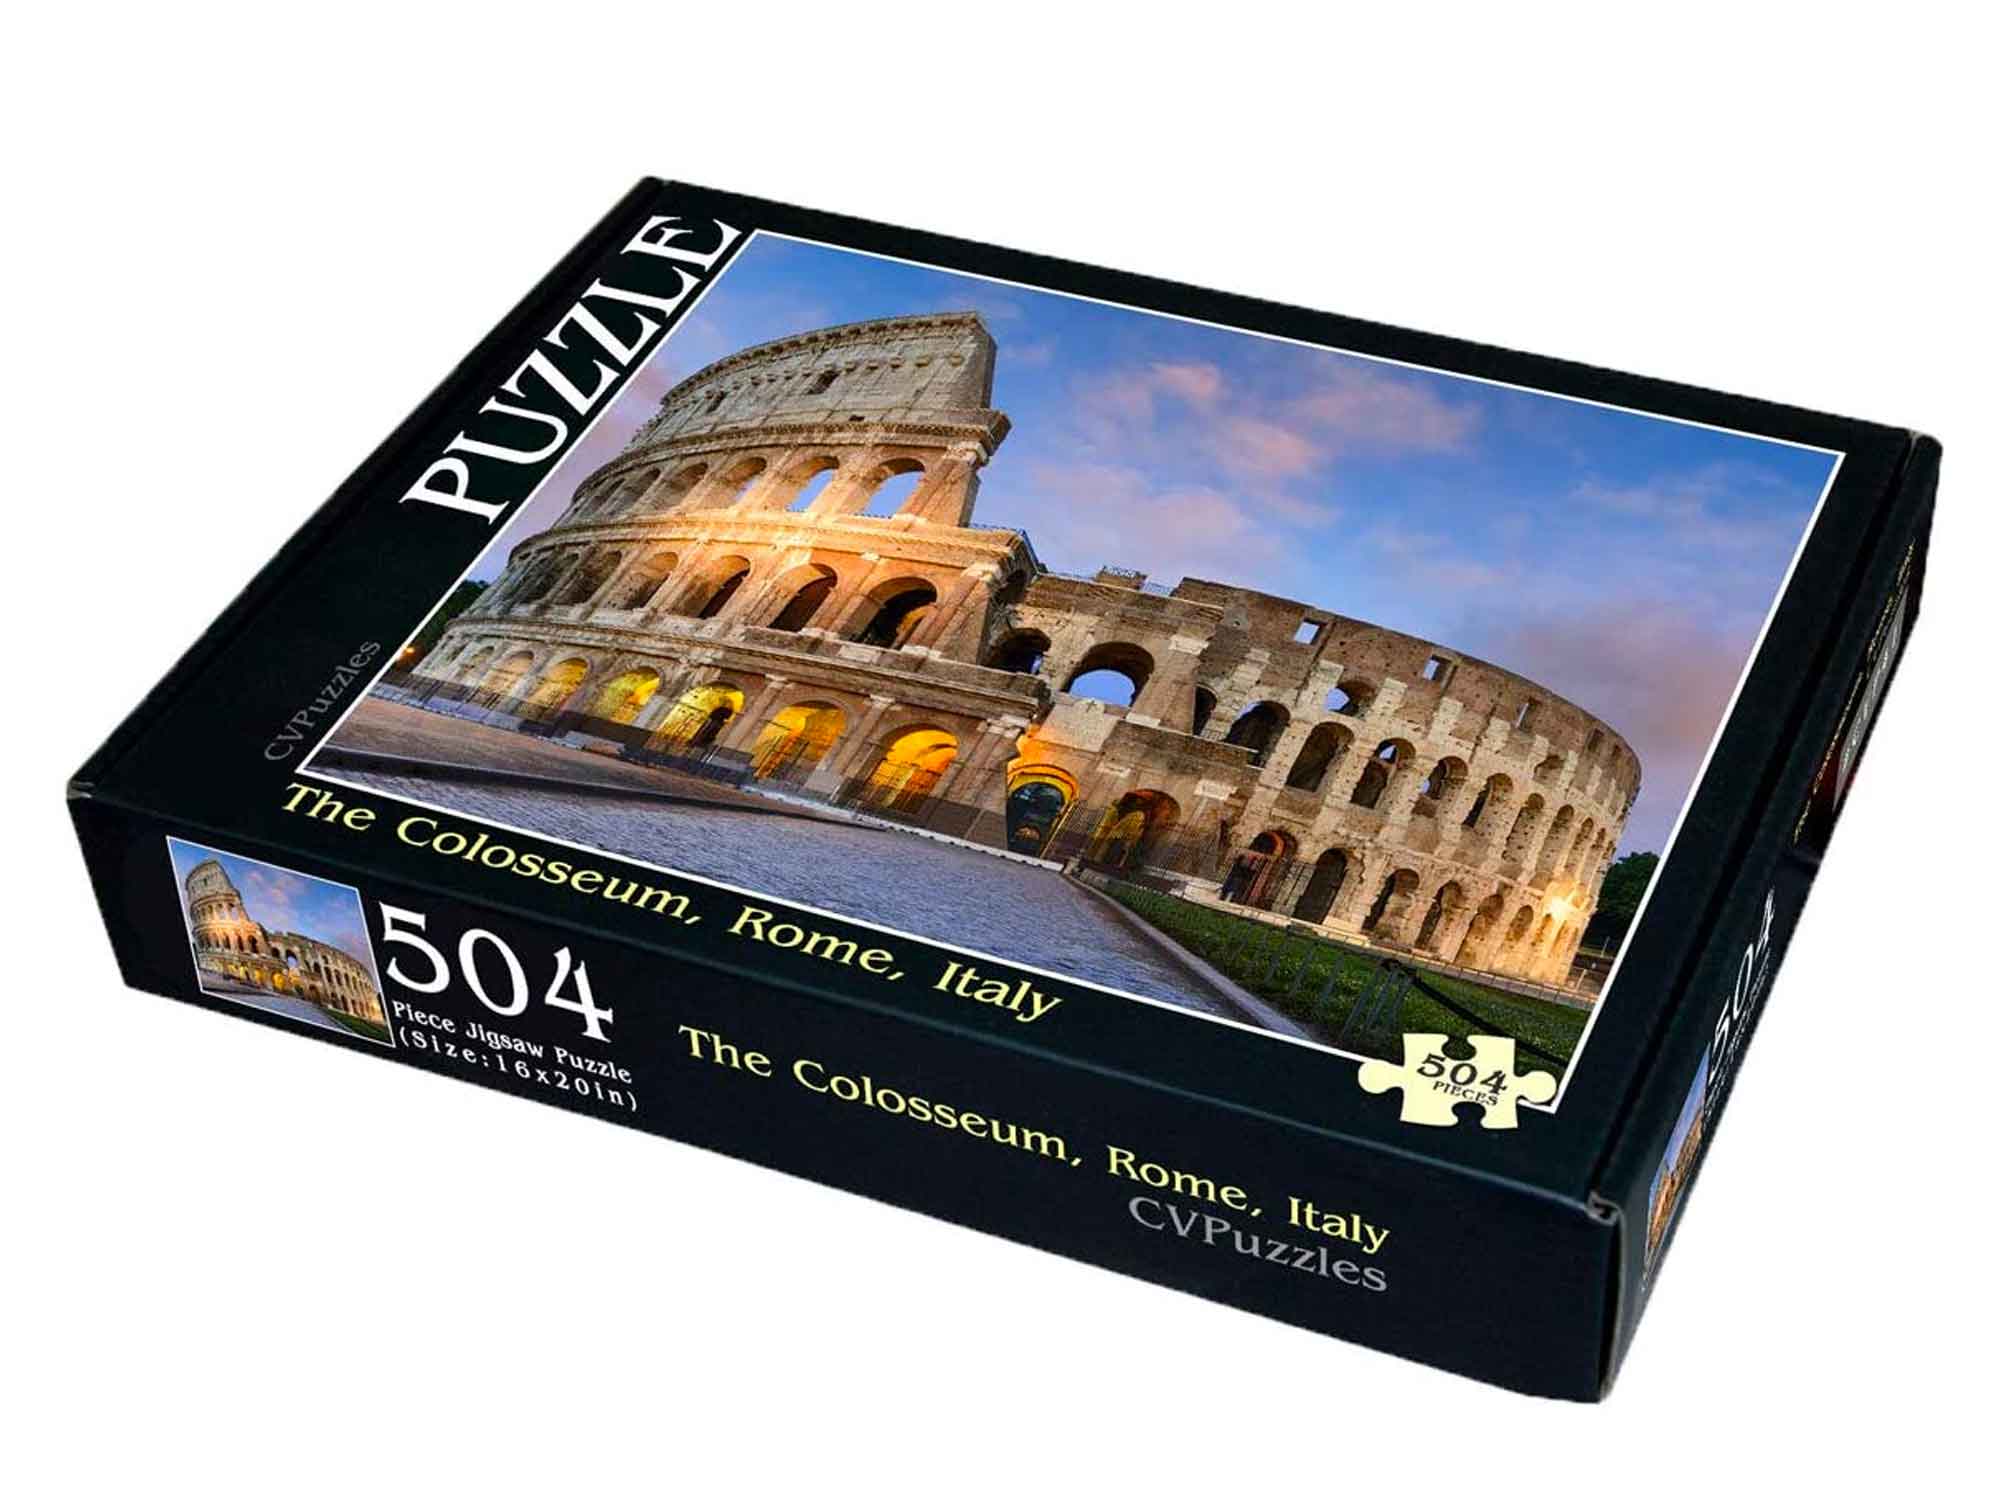 The Colosseum, Rome, Italy 504 Piece Jigsaw Puzzle 16